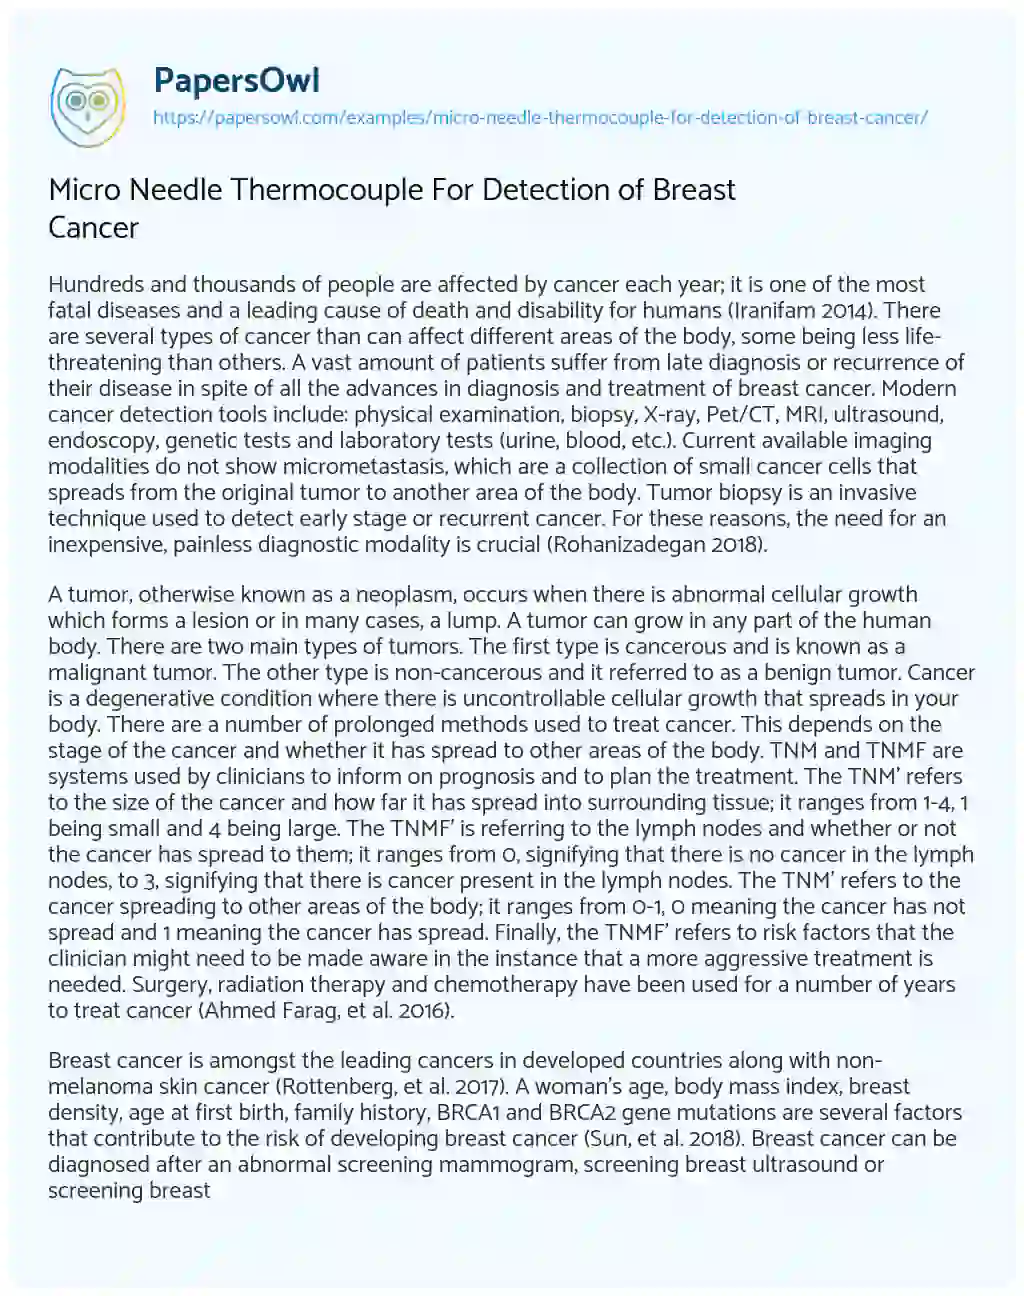 Essay on Micro Needle Thermocouple for Detection of Breast Cancer